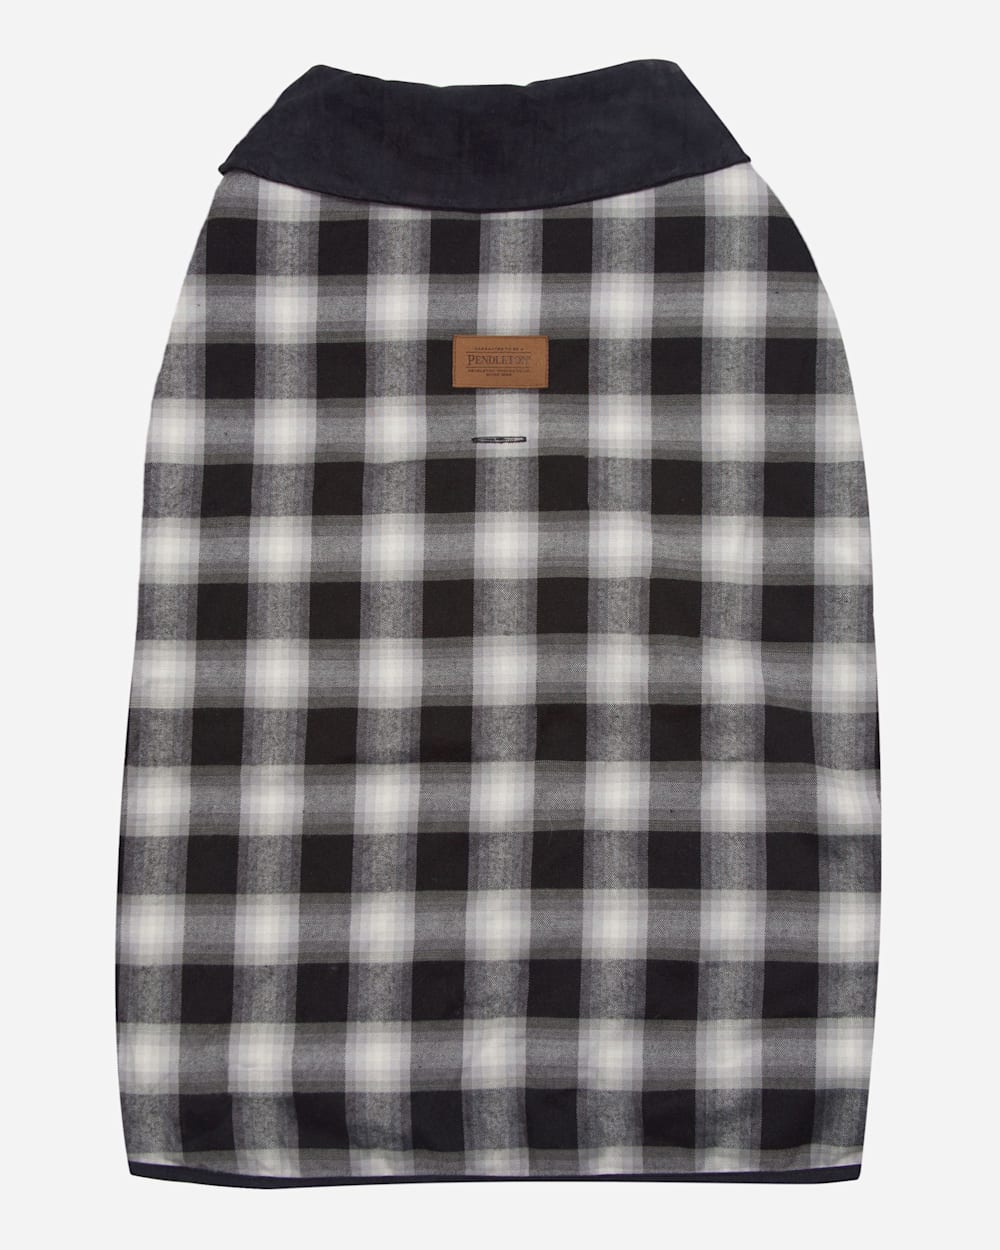 CHARCOAL OMBRE PLAID DOG COAT IN SIZE X-LARGE image number 5